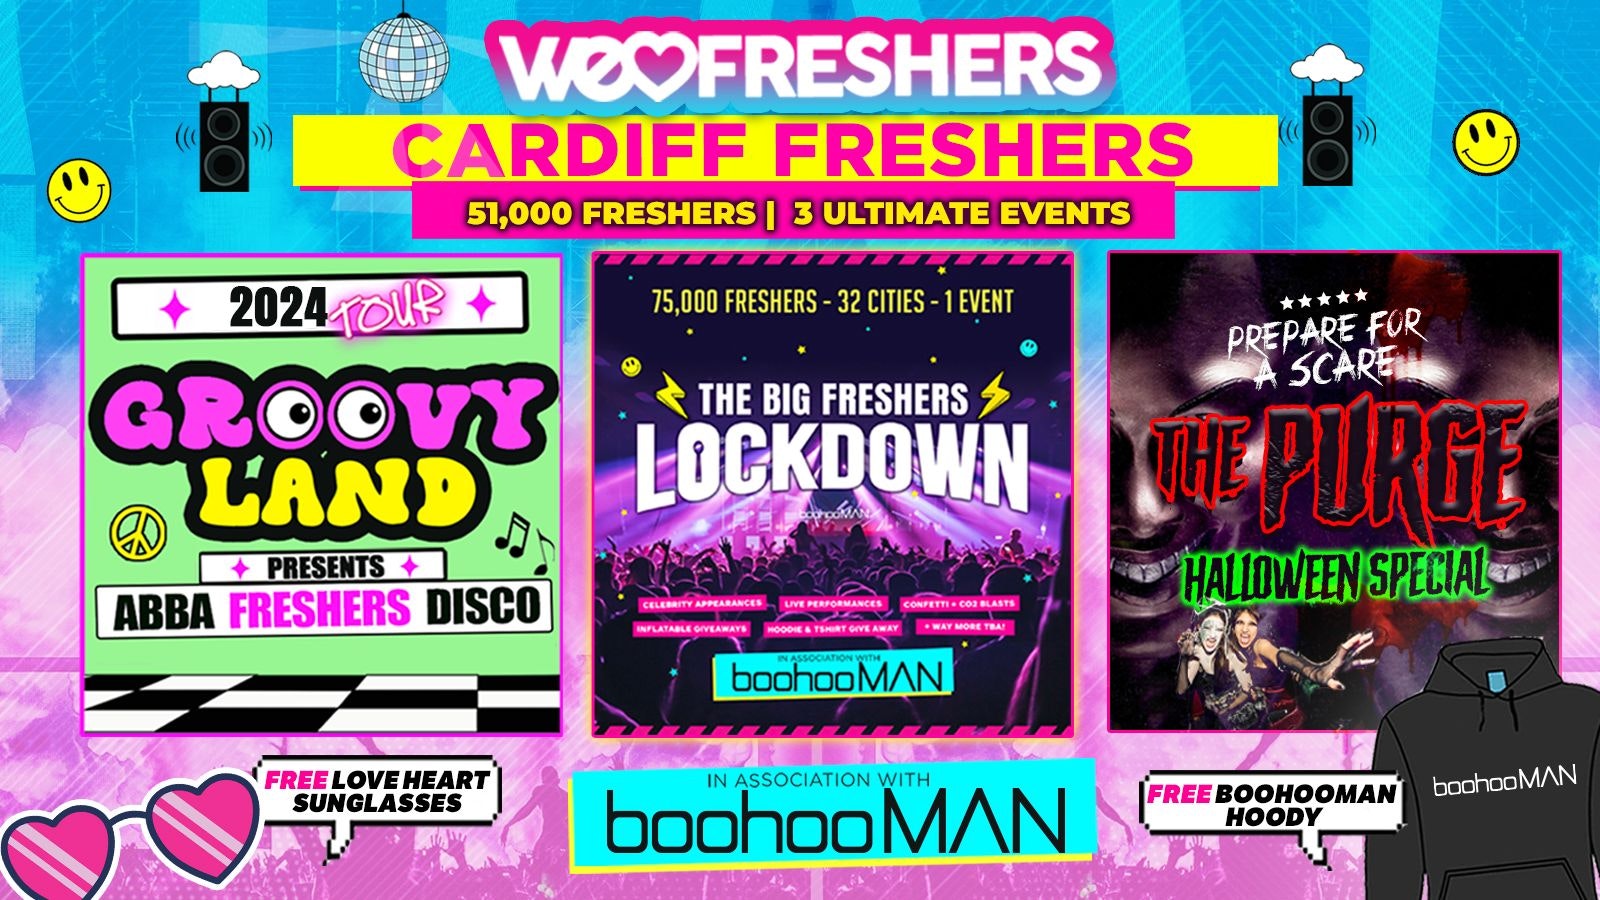 WE LOVE CARDIFF FRESHERS 2024 in association with boohooMAN ❗FREE BOOHOOMAN HOODIE TODAY ONLY❗